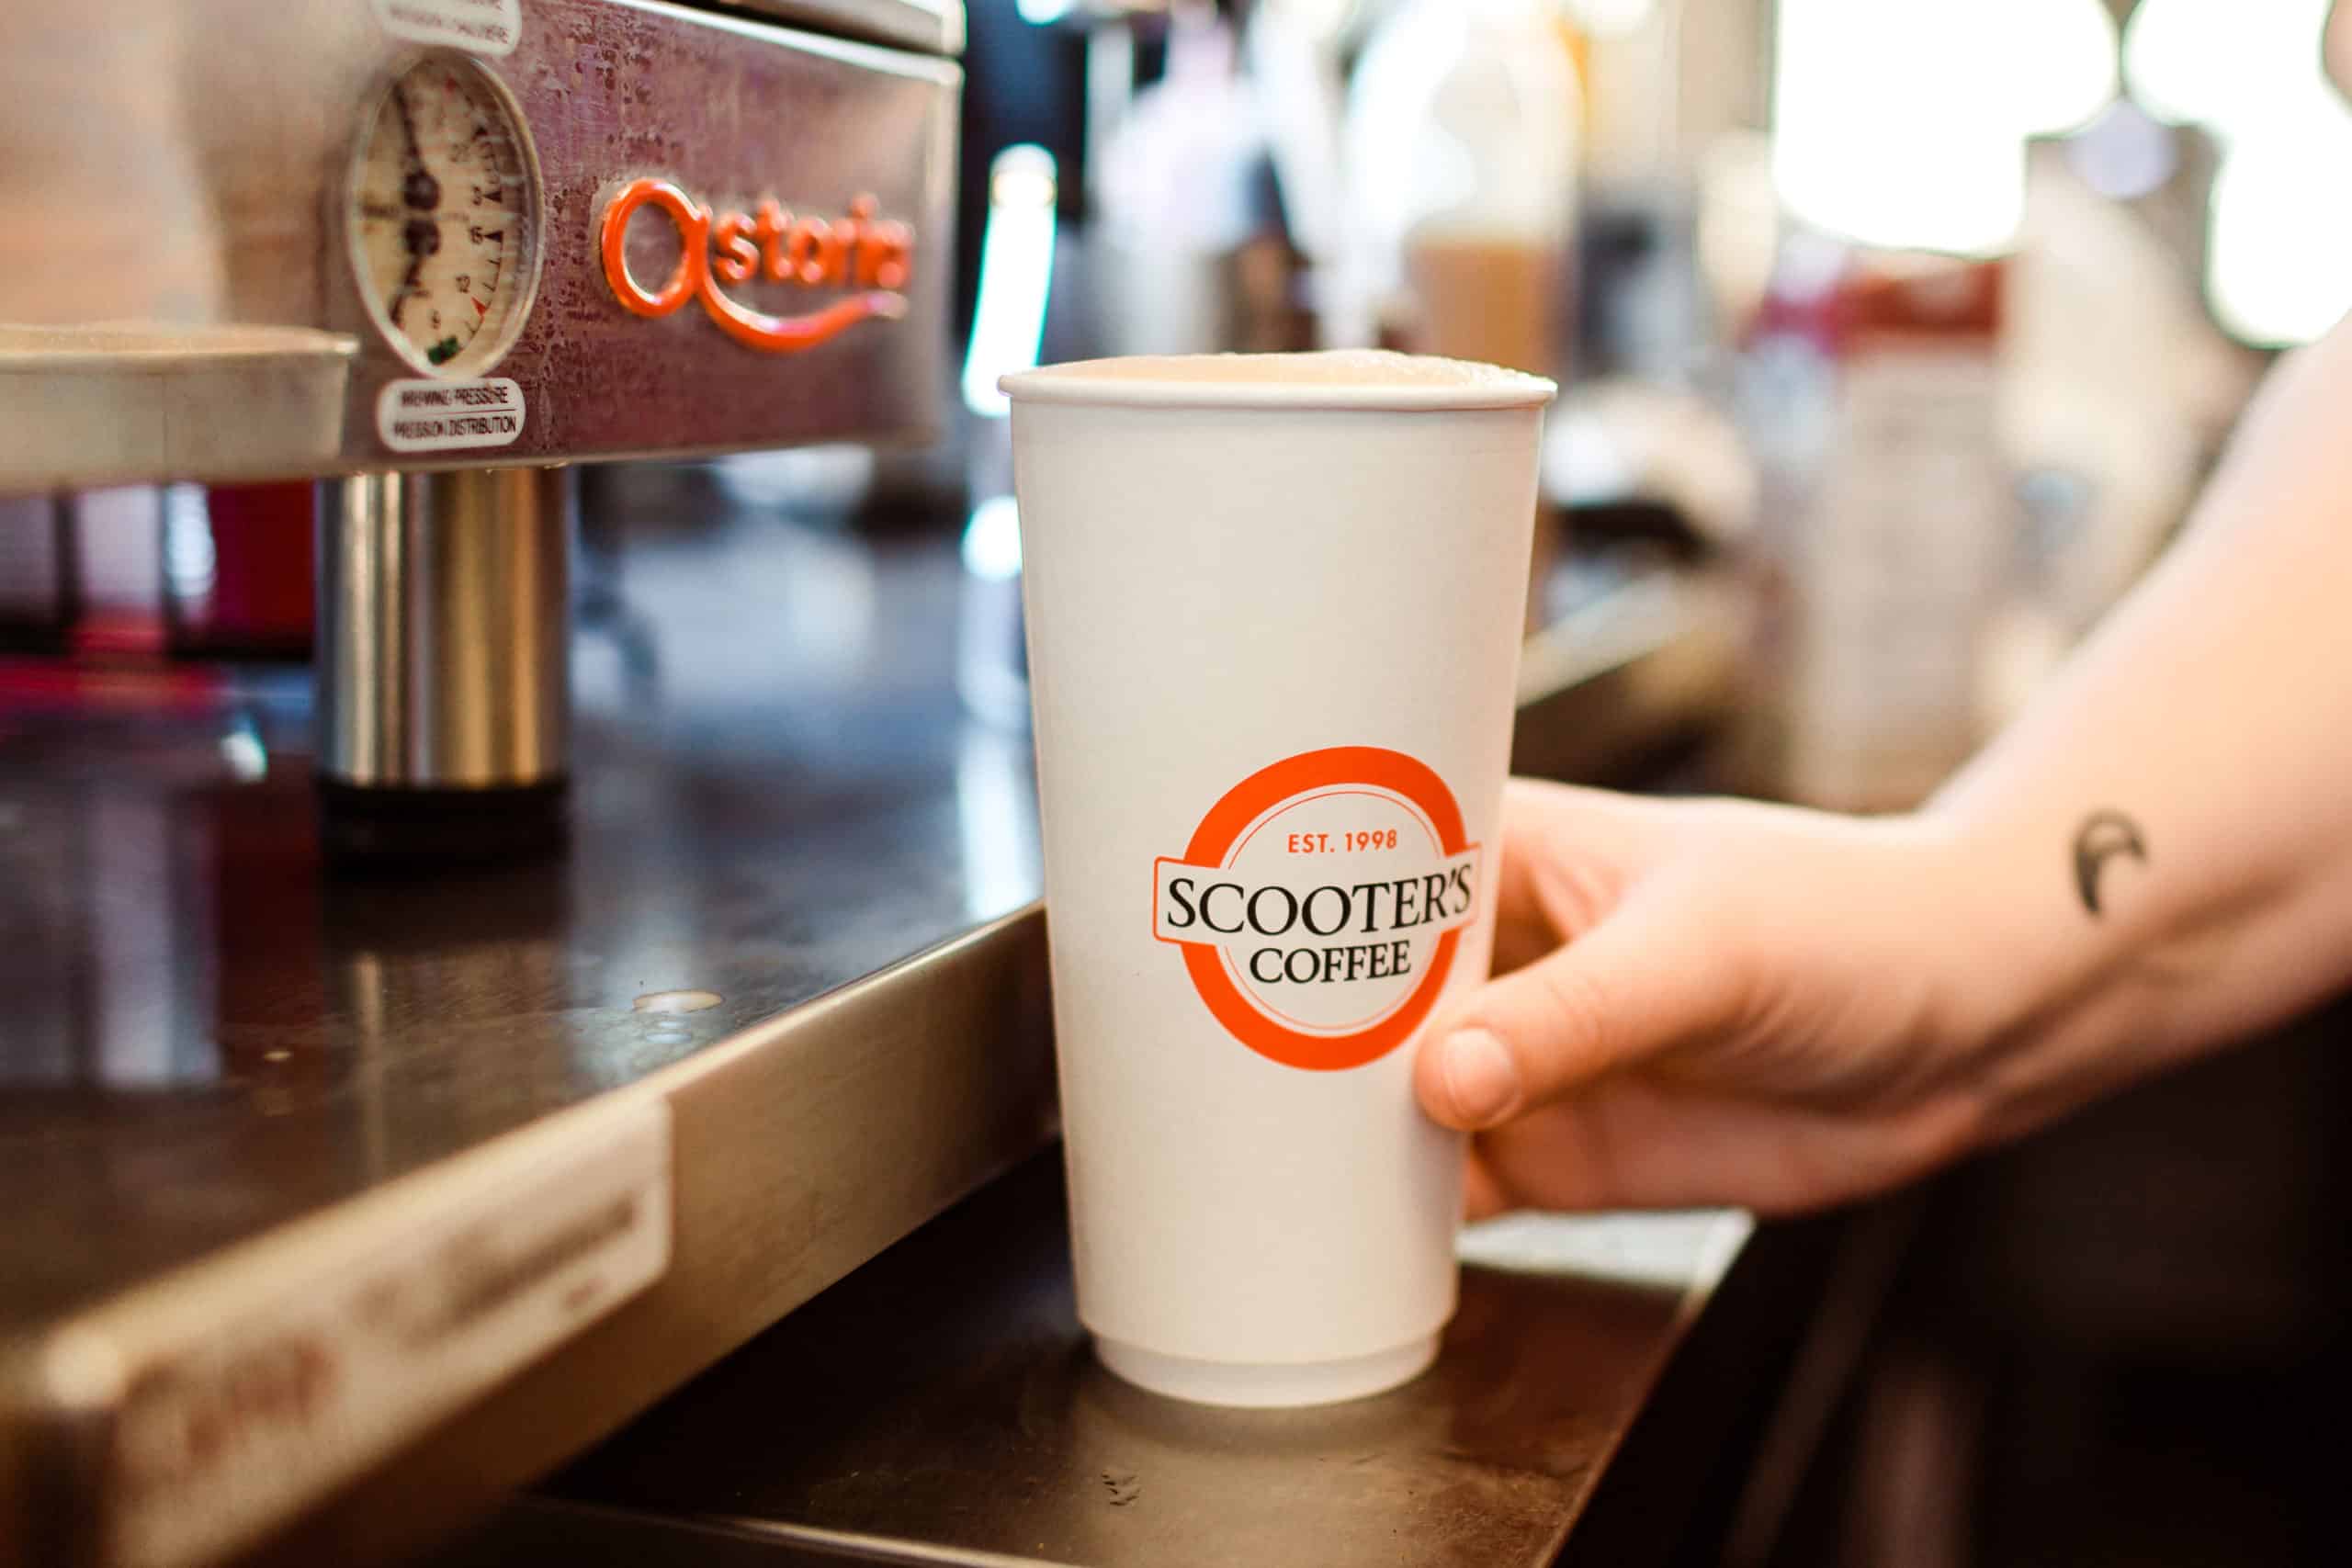 A Scooter's Coffee branded cup on an espresso machine.